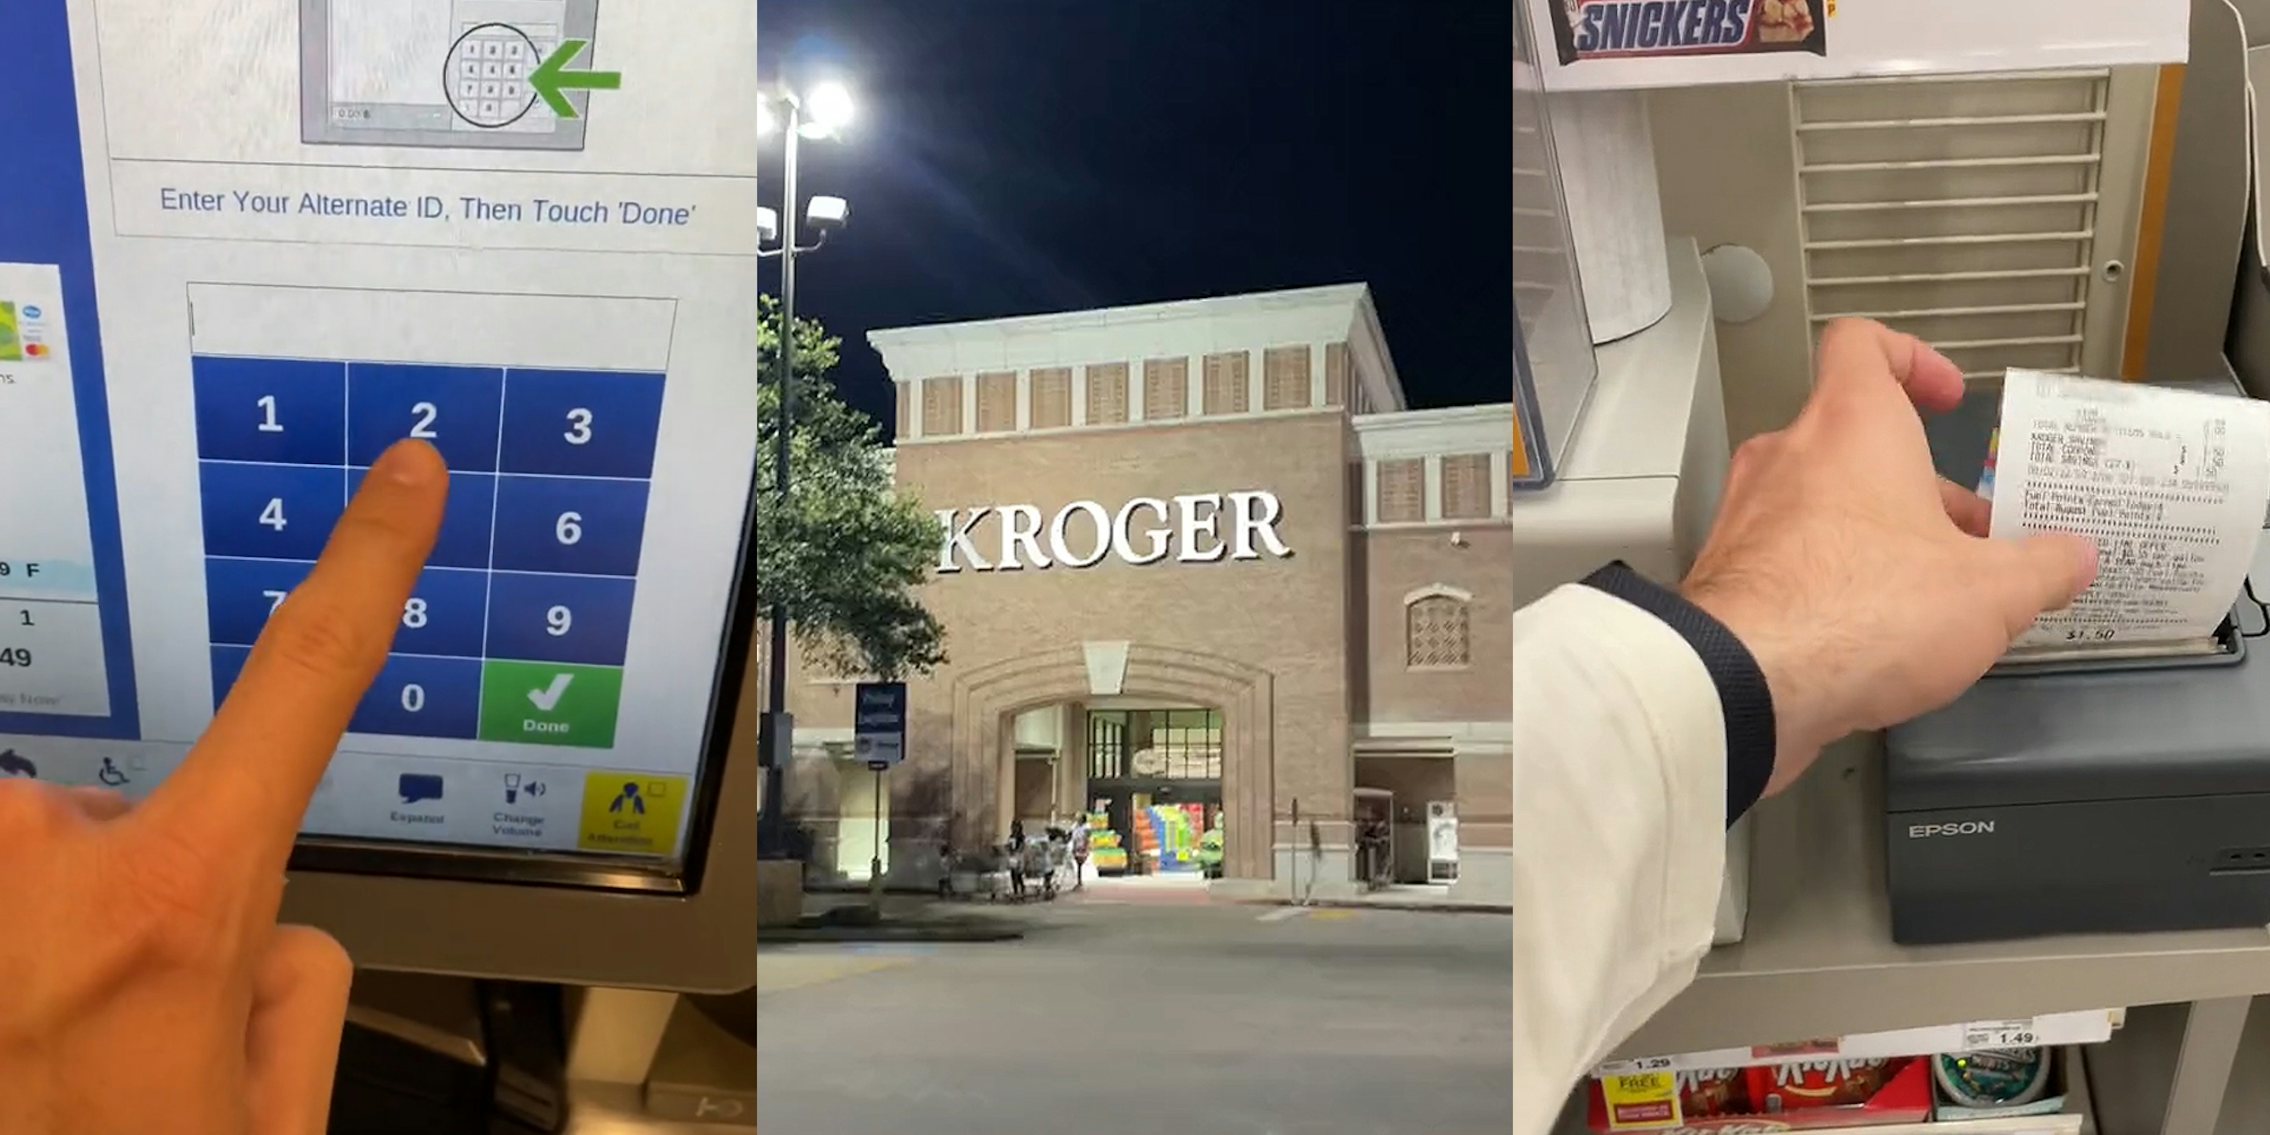 man hand pressing numbers on touch screen (l) Kroger building and sign (c) man grabbing receipt (r)